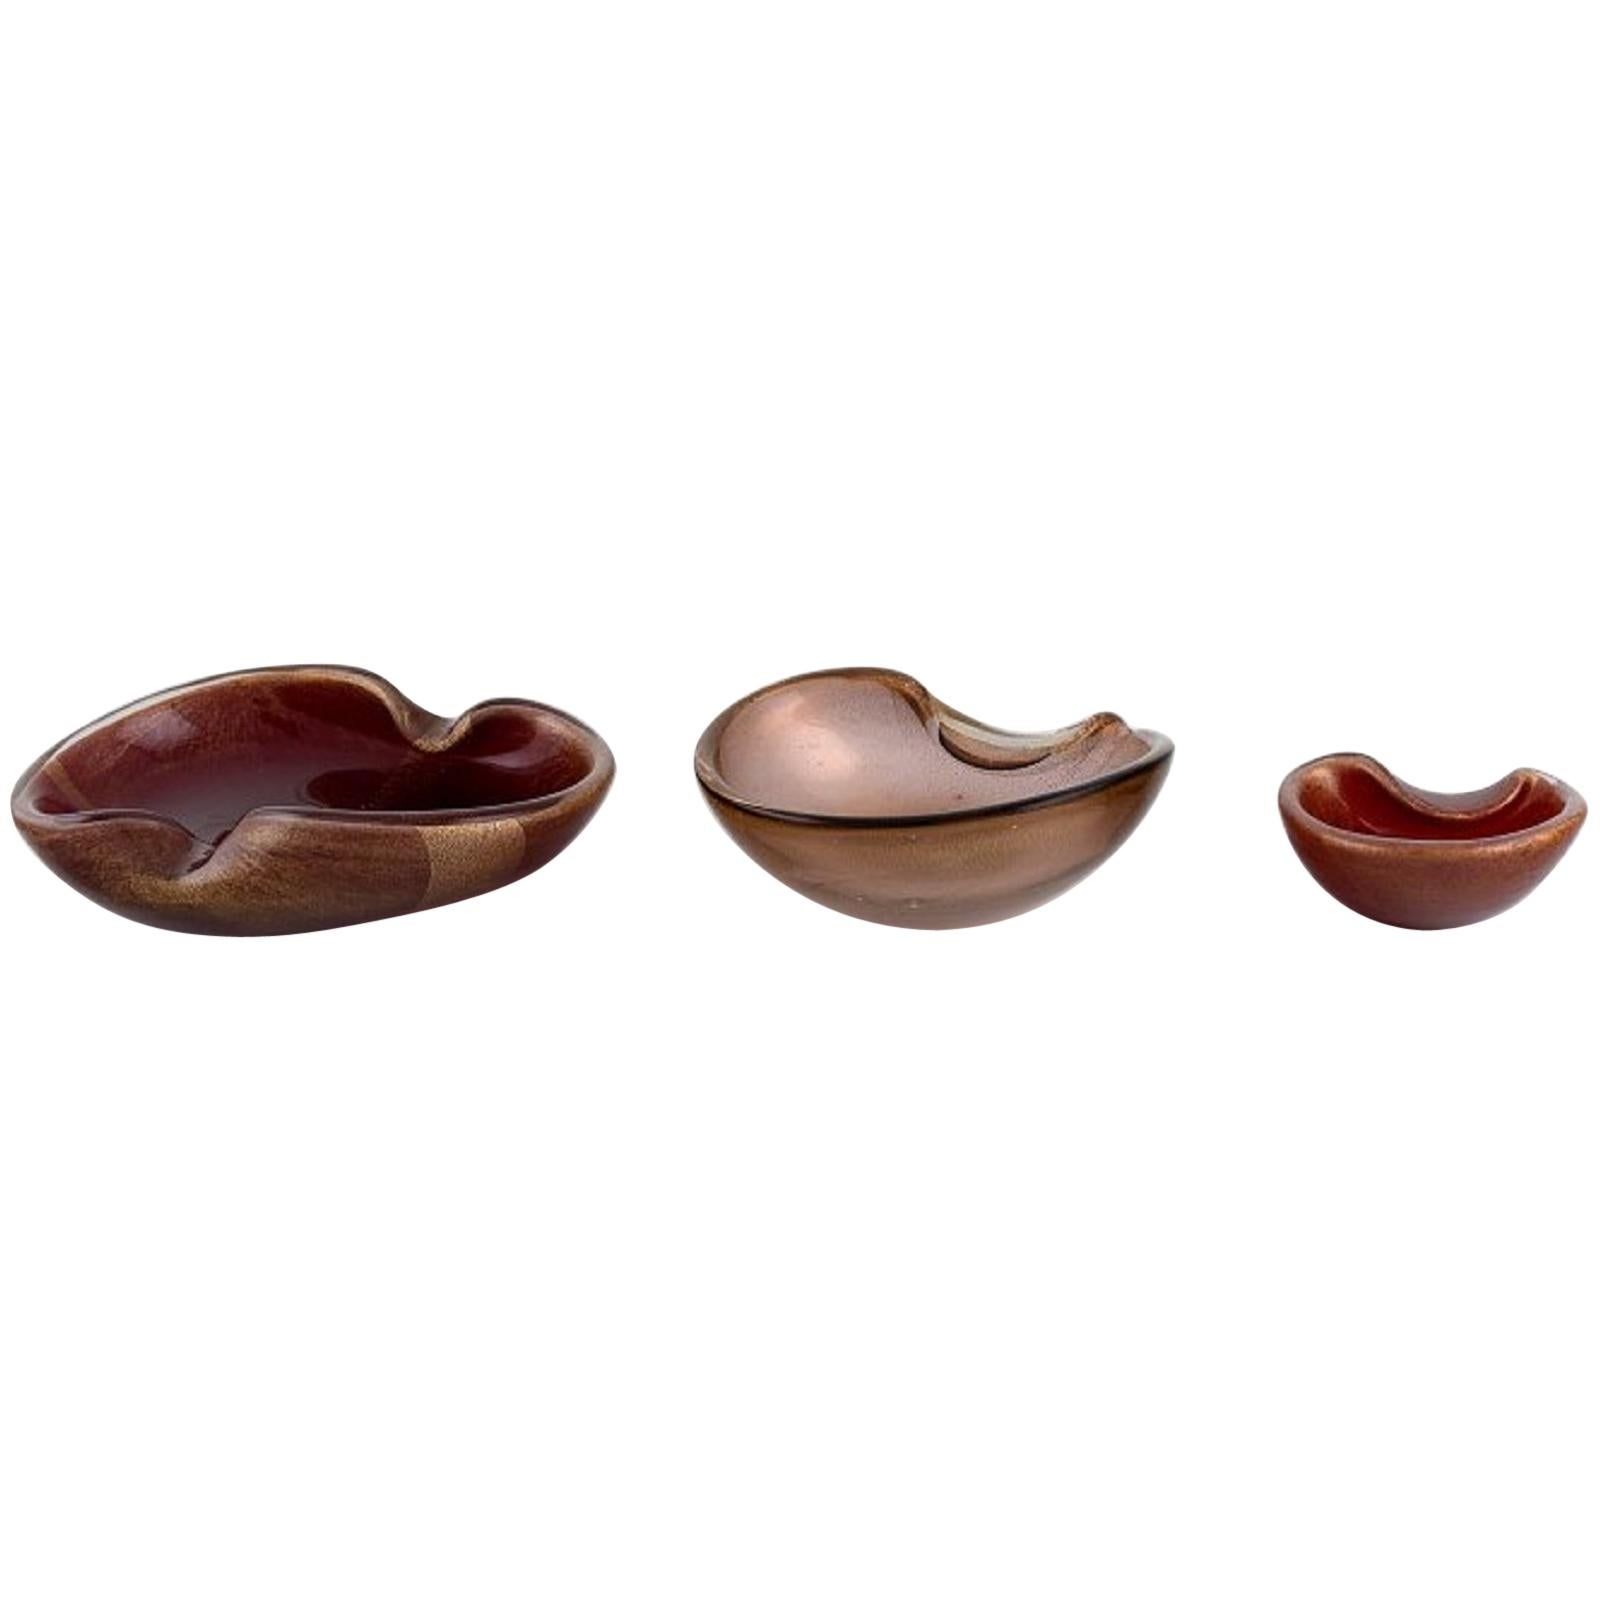 Three Organically Shaped Murano Bowls in Mouth Blown Art Glass, Italian Design For Sale